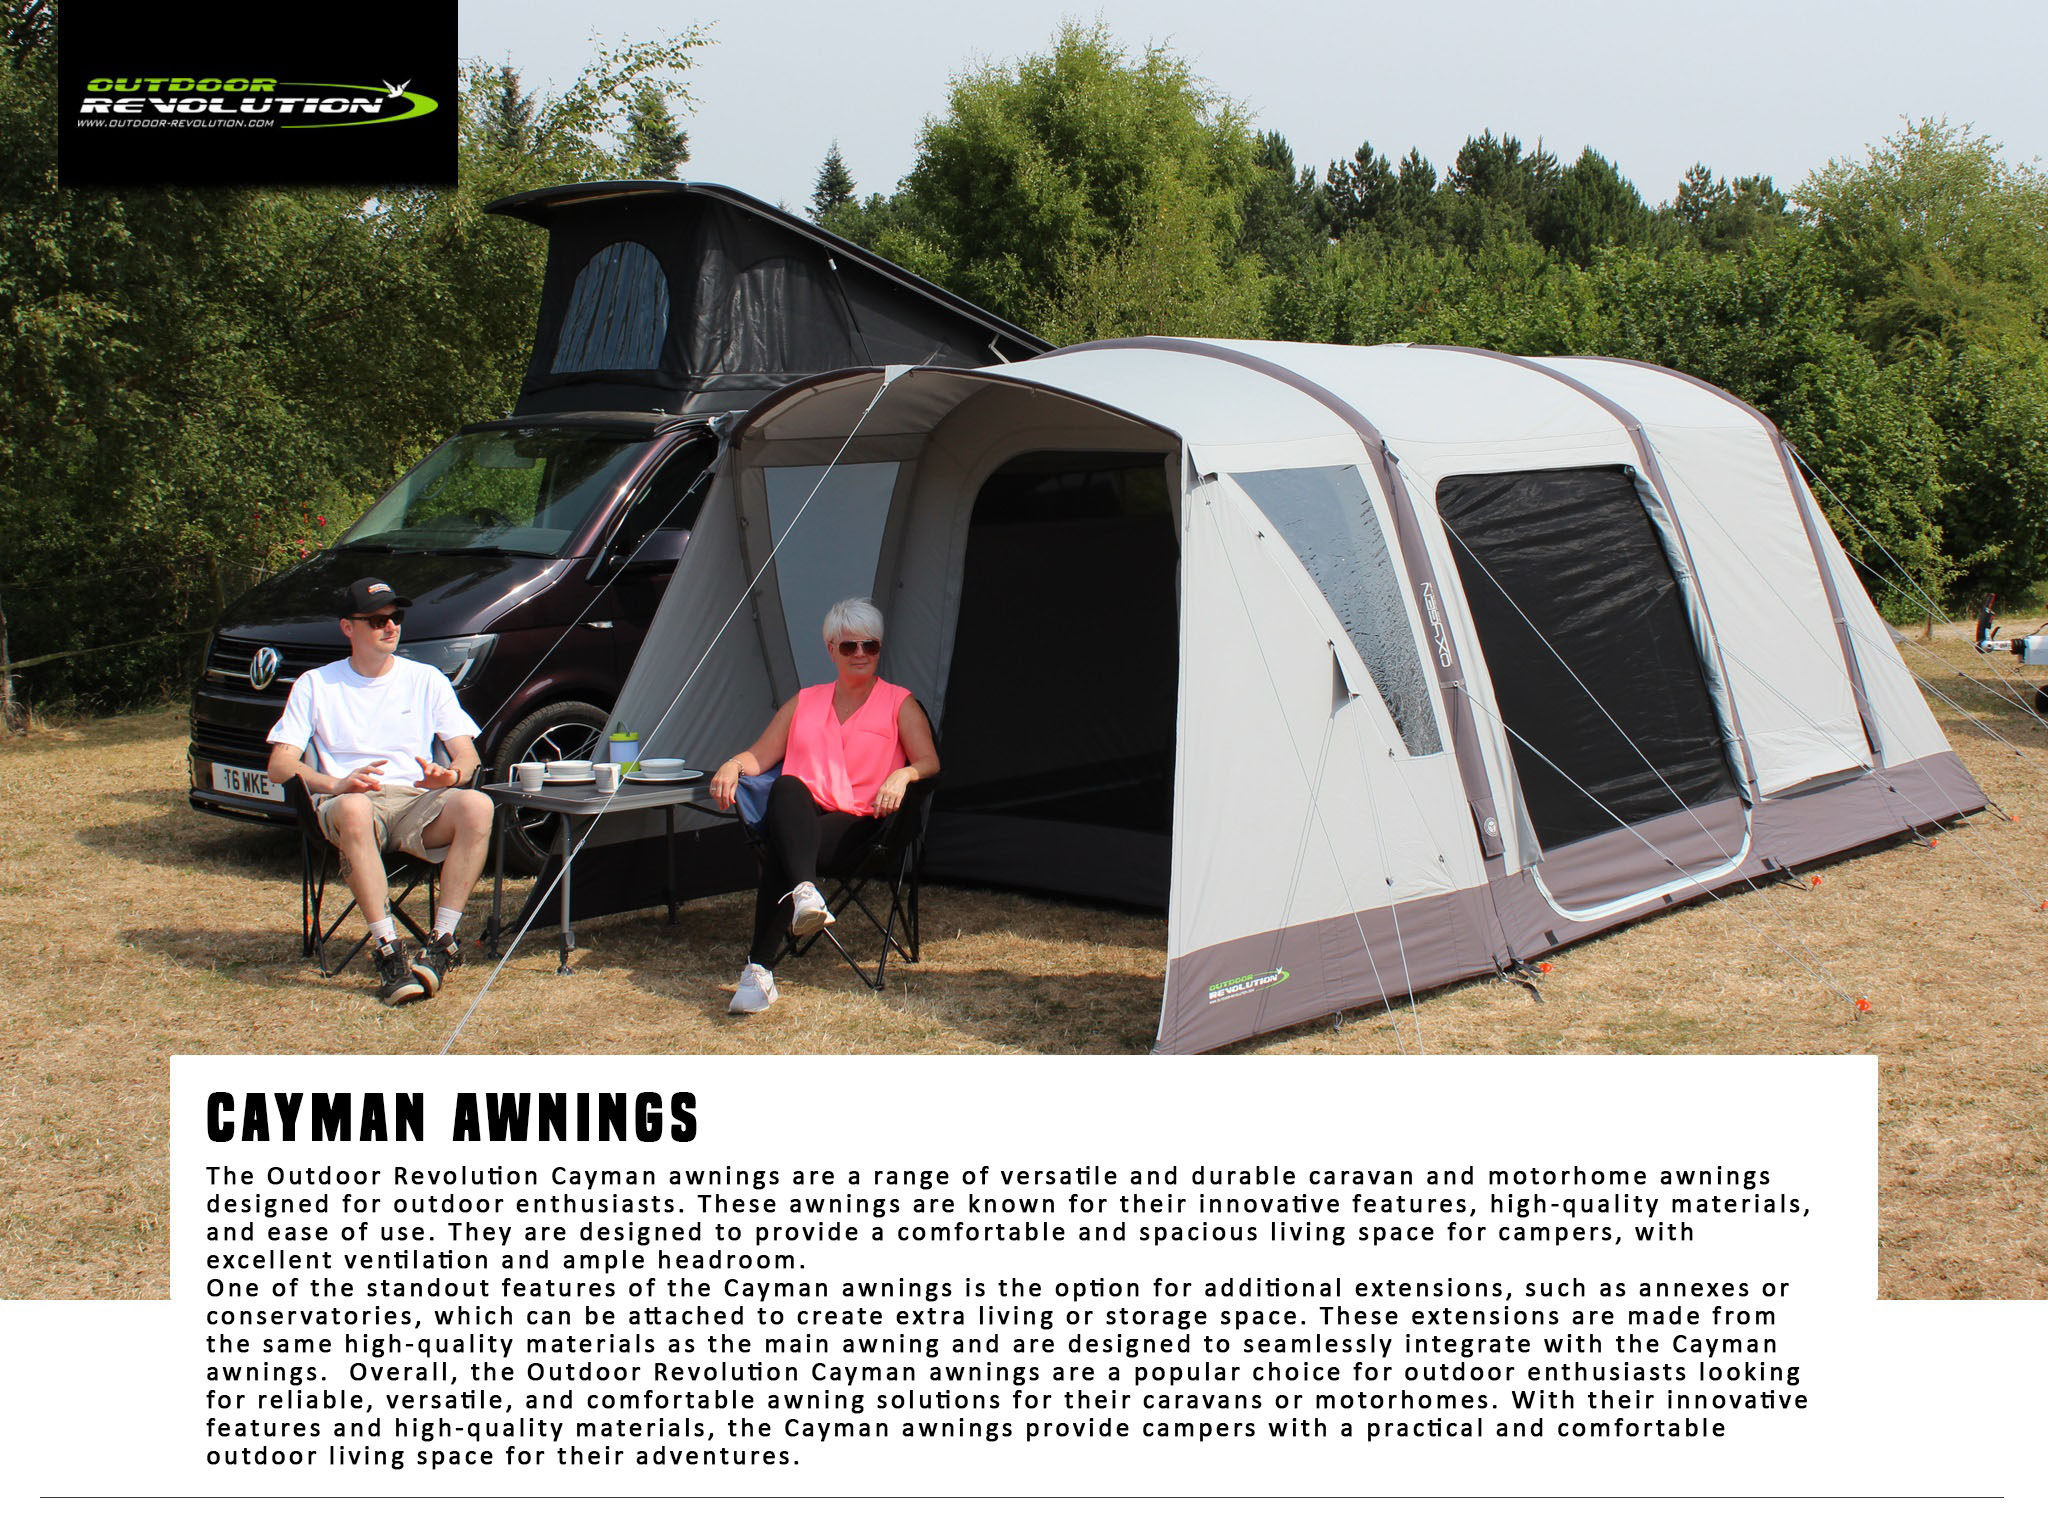 Outdoor Revolution Cayman Awnings